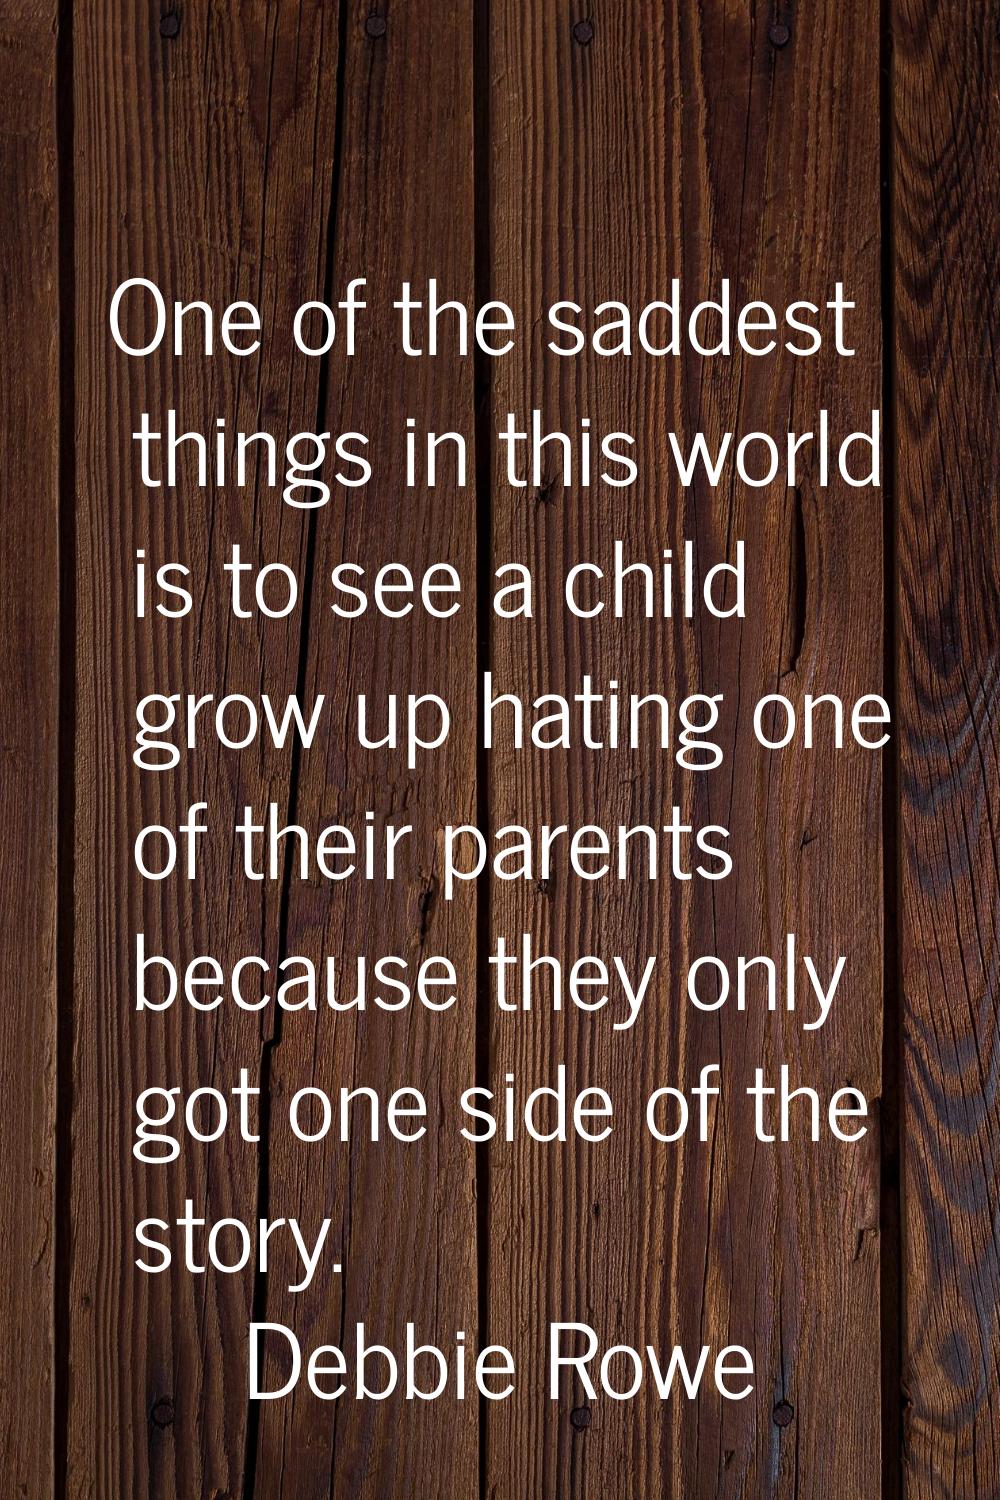 One of the saddest things in this world is to see a child grow up hating one of their parents becau